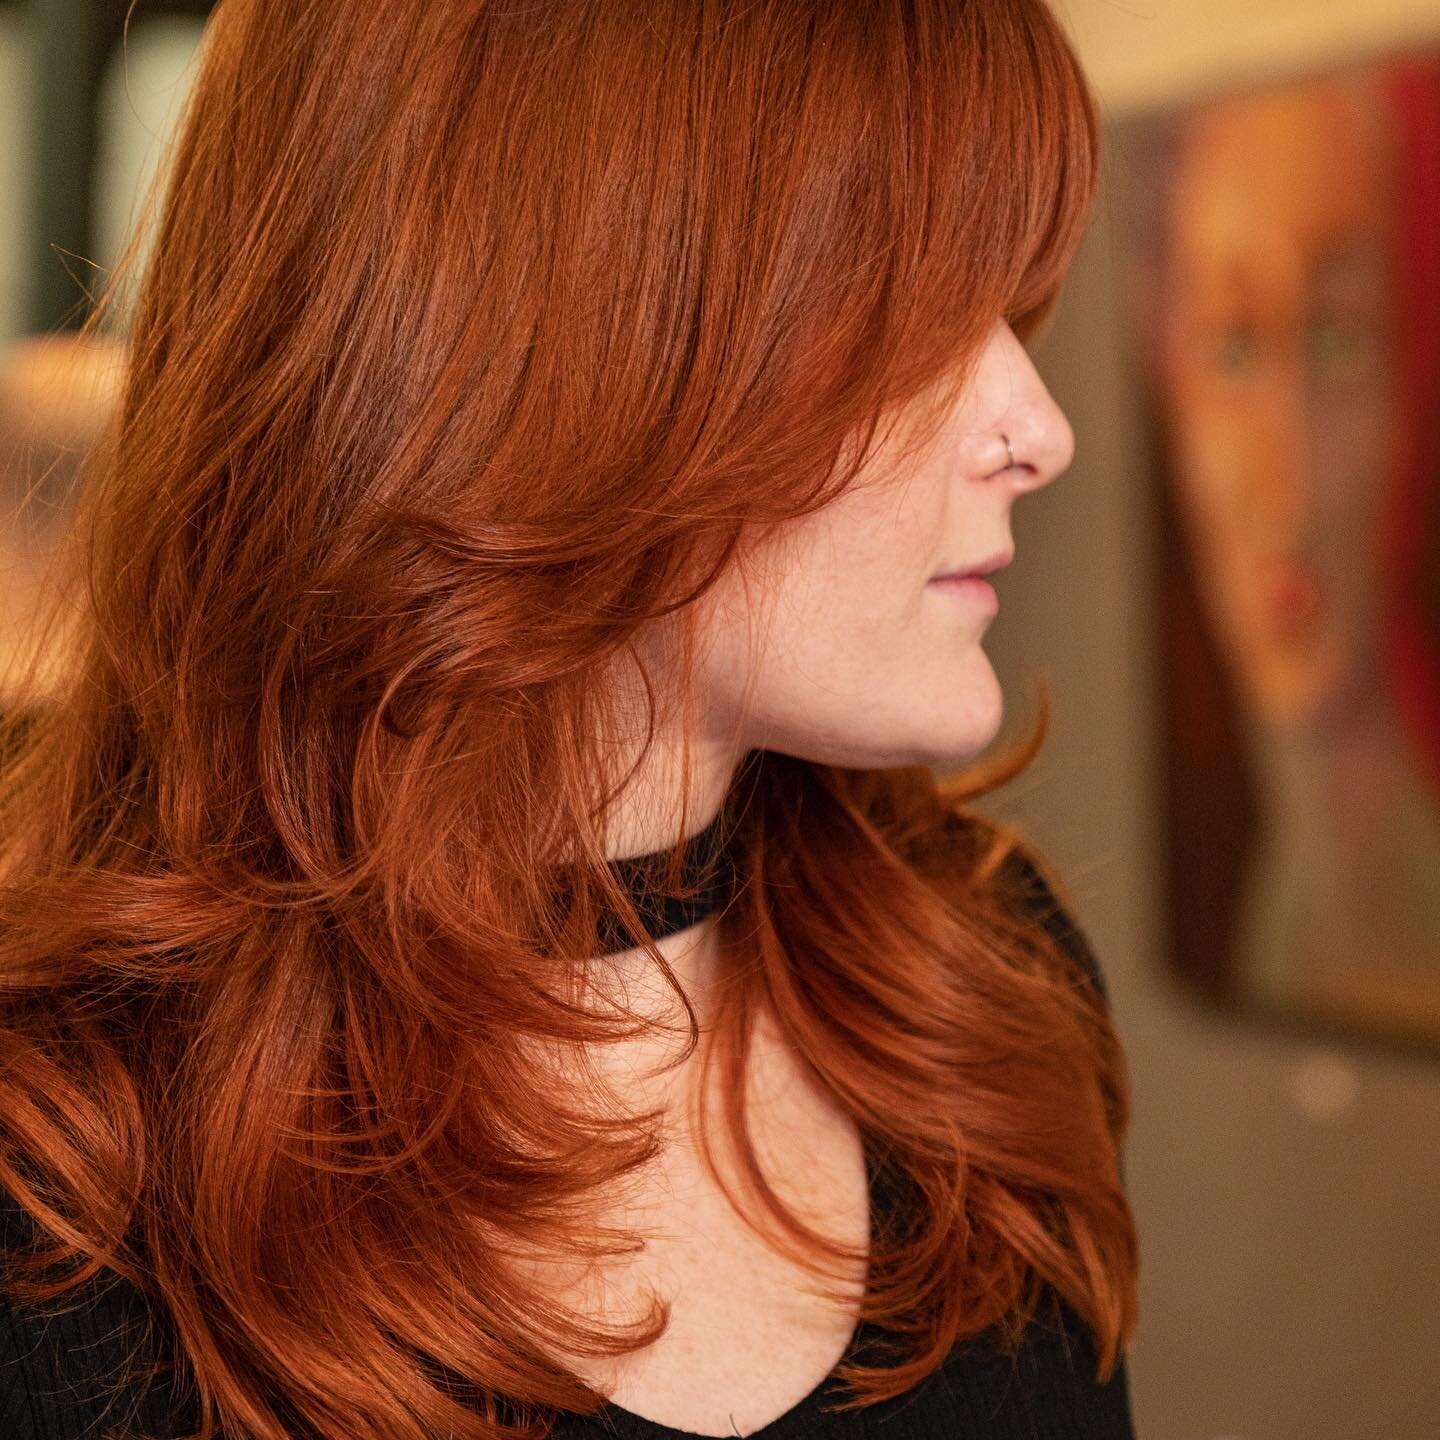 Red hair is a bold statement, an invitation to stand out from the crowd. With professional haircare, unleash the radiance of your fiery locks and let your vibrant spirit shine through 💣❤️&zwj;🔥

#redhair #barcelonahair #operalounge #instahair #beau